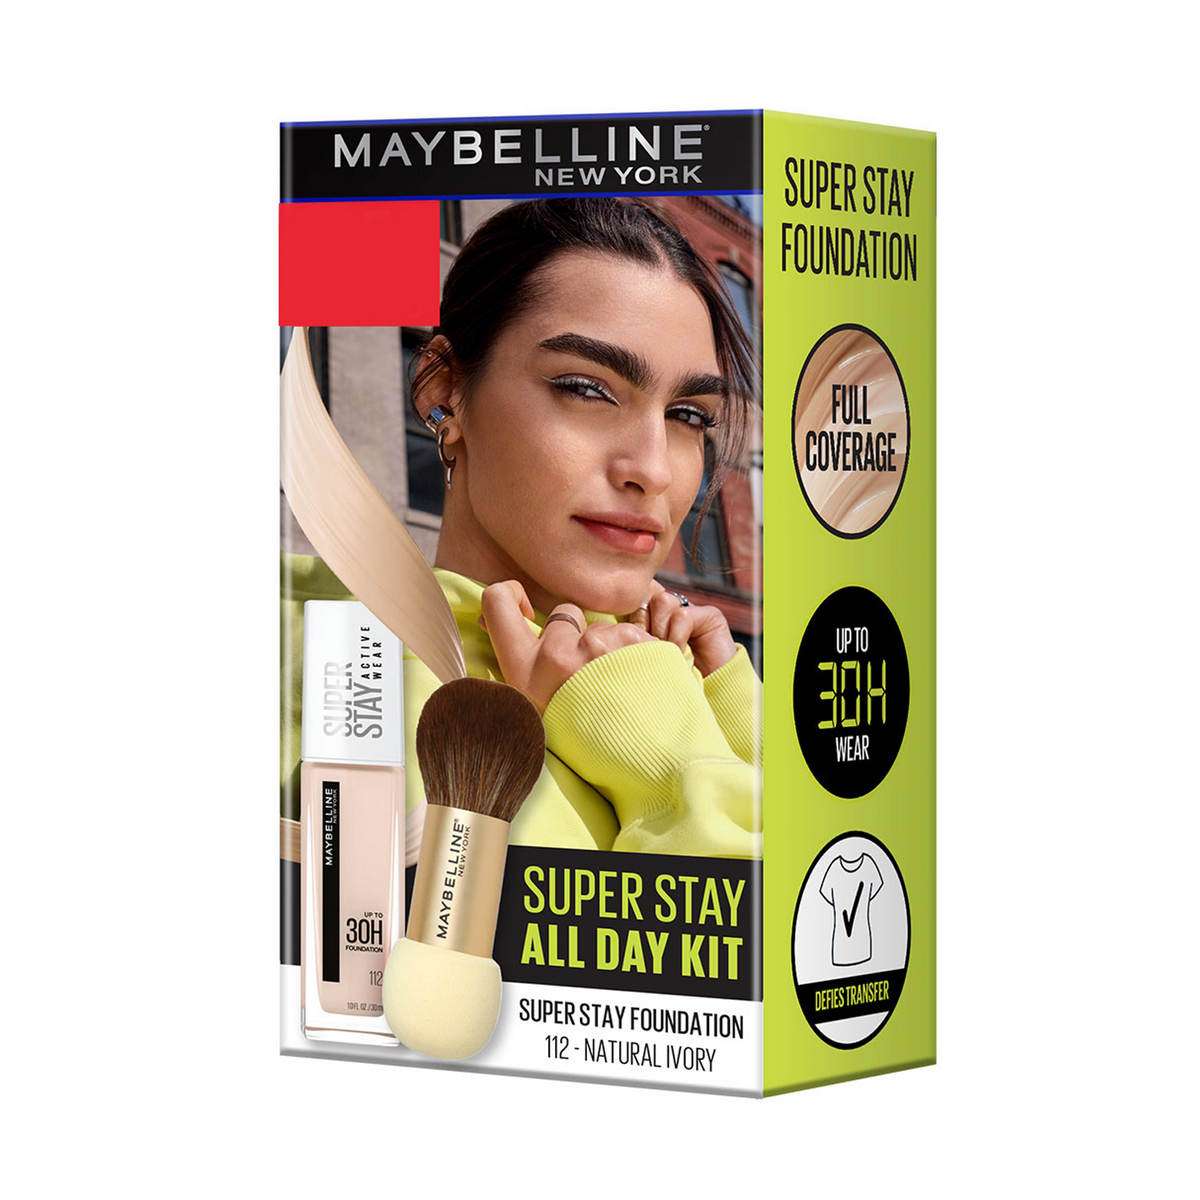 Buy Maybelline New Best SSBeauty at Active in Coverage Super Foundation Wear India Stay Price Liquid York | Online Full